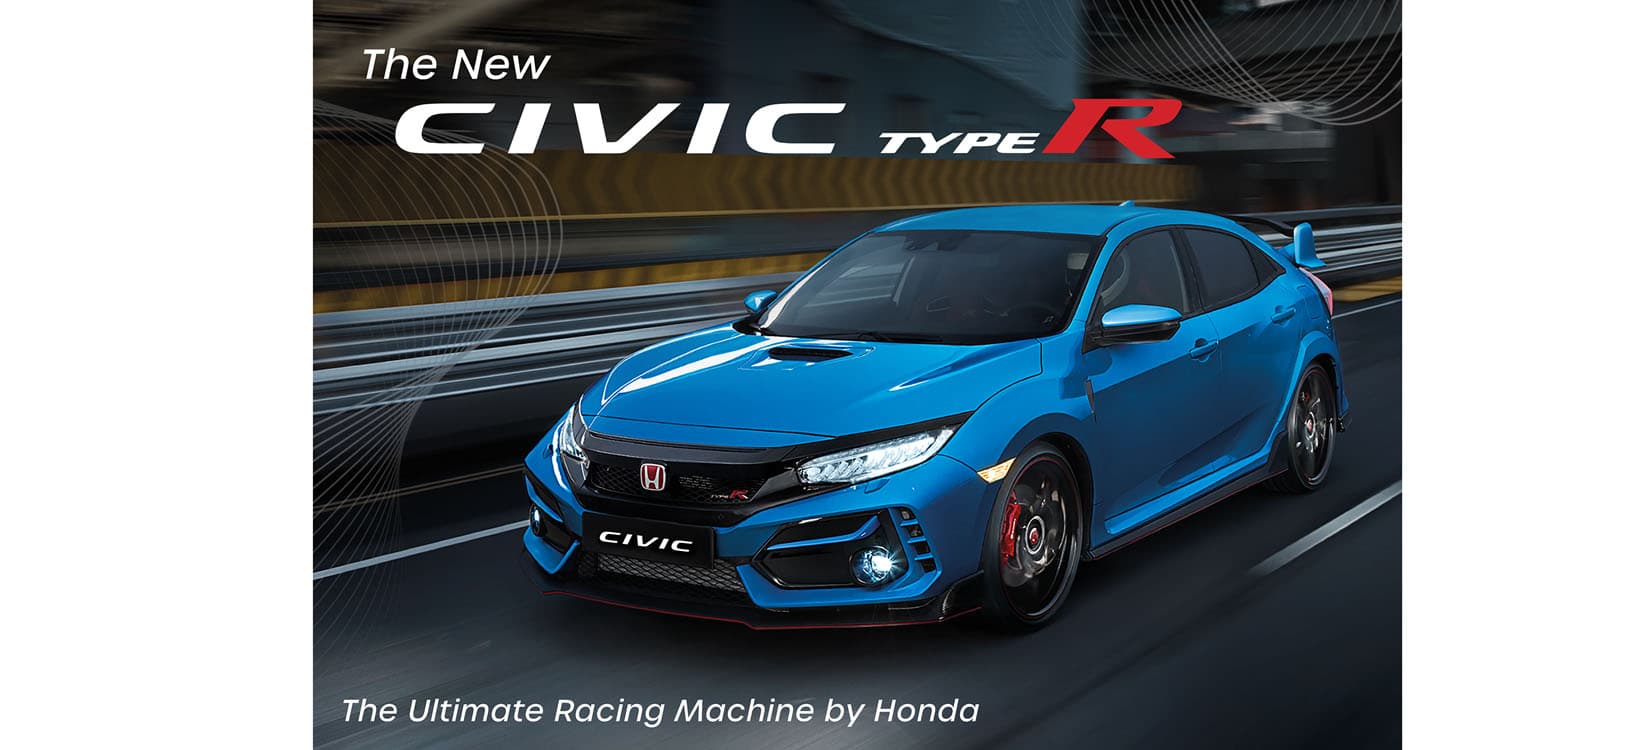 Honda officially launches the New Civic Type R in the Philippines